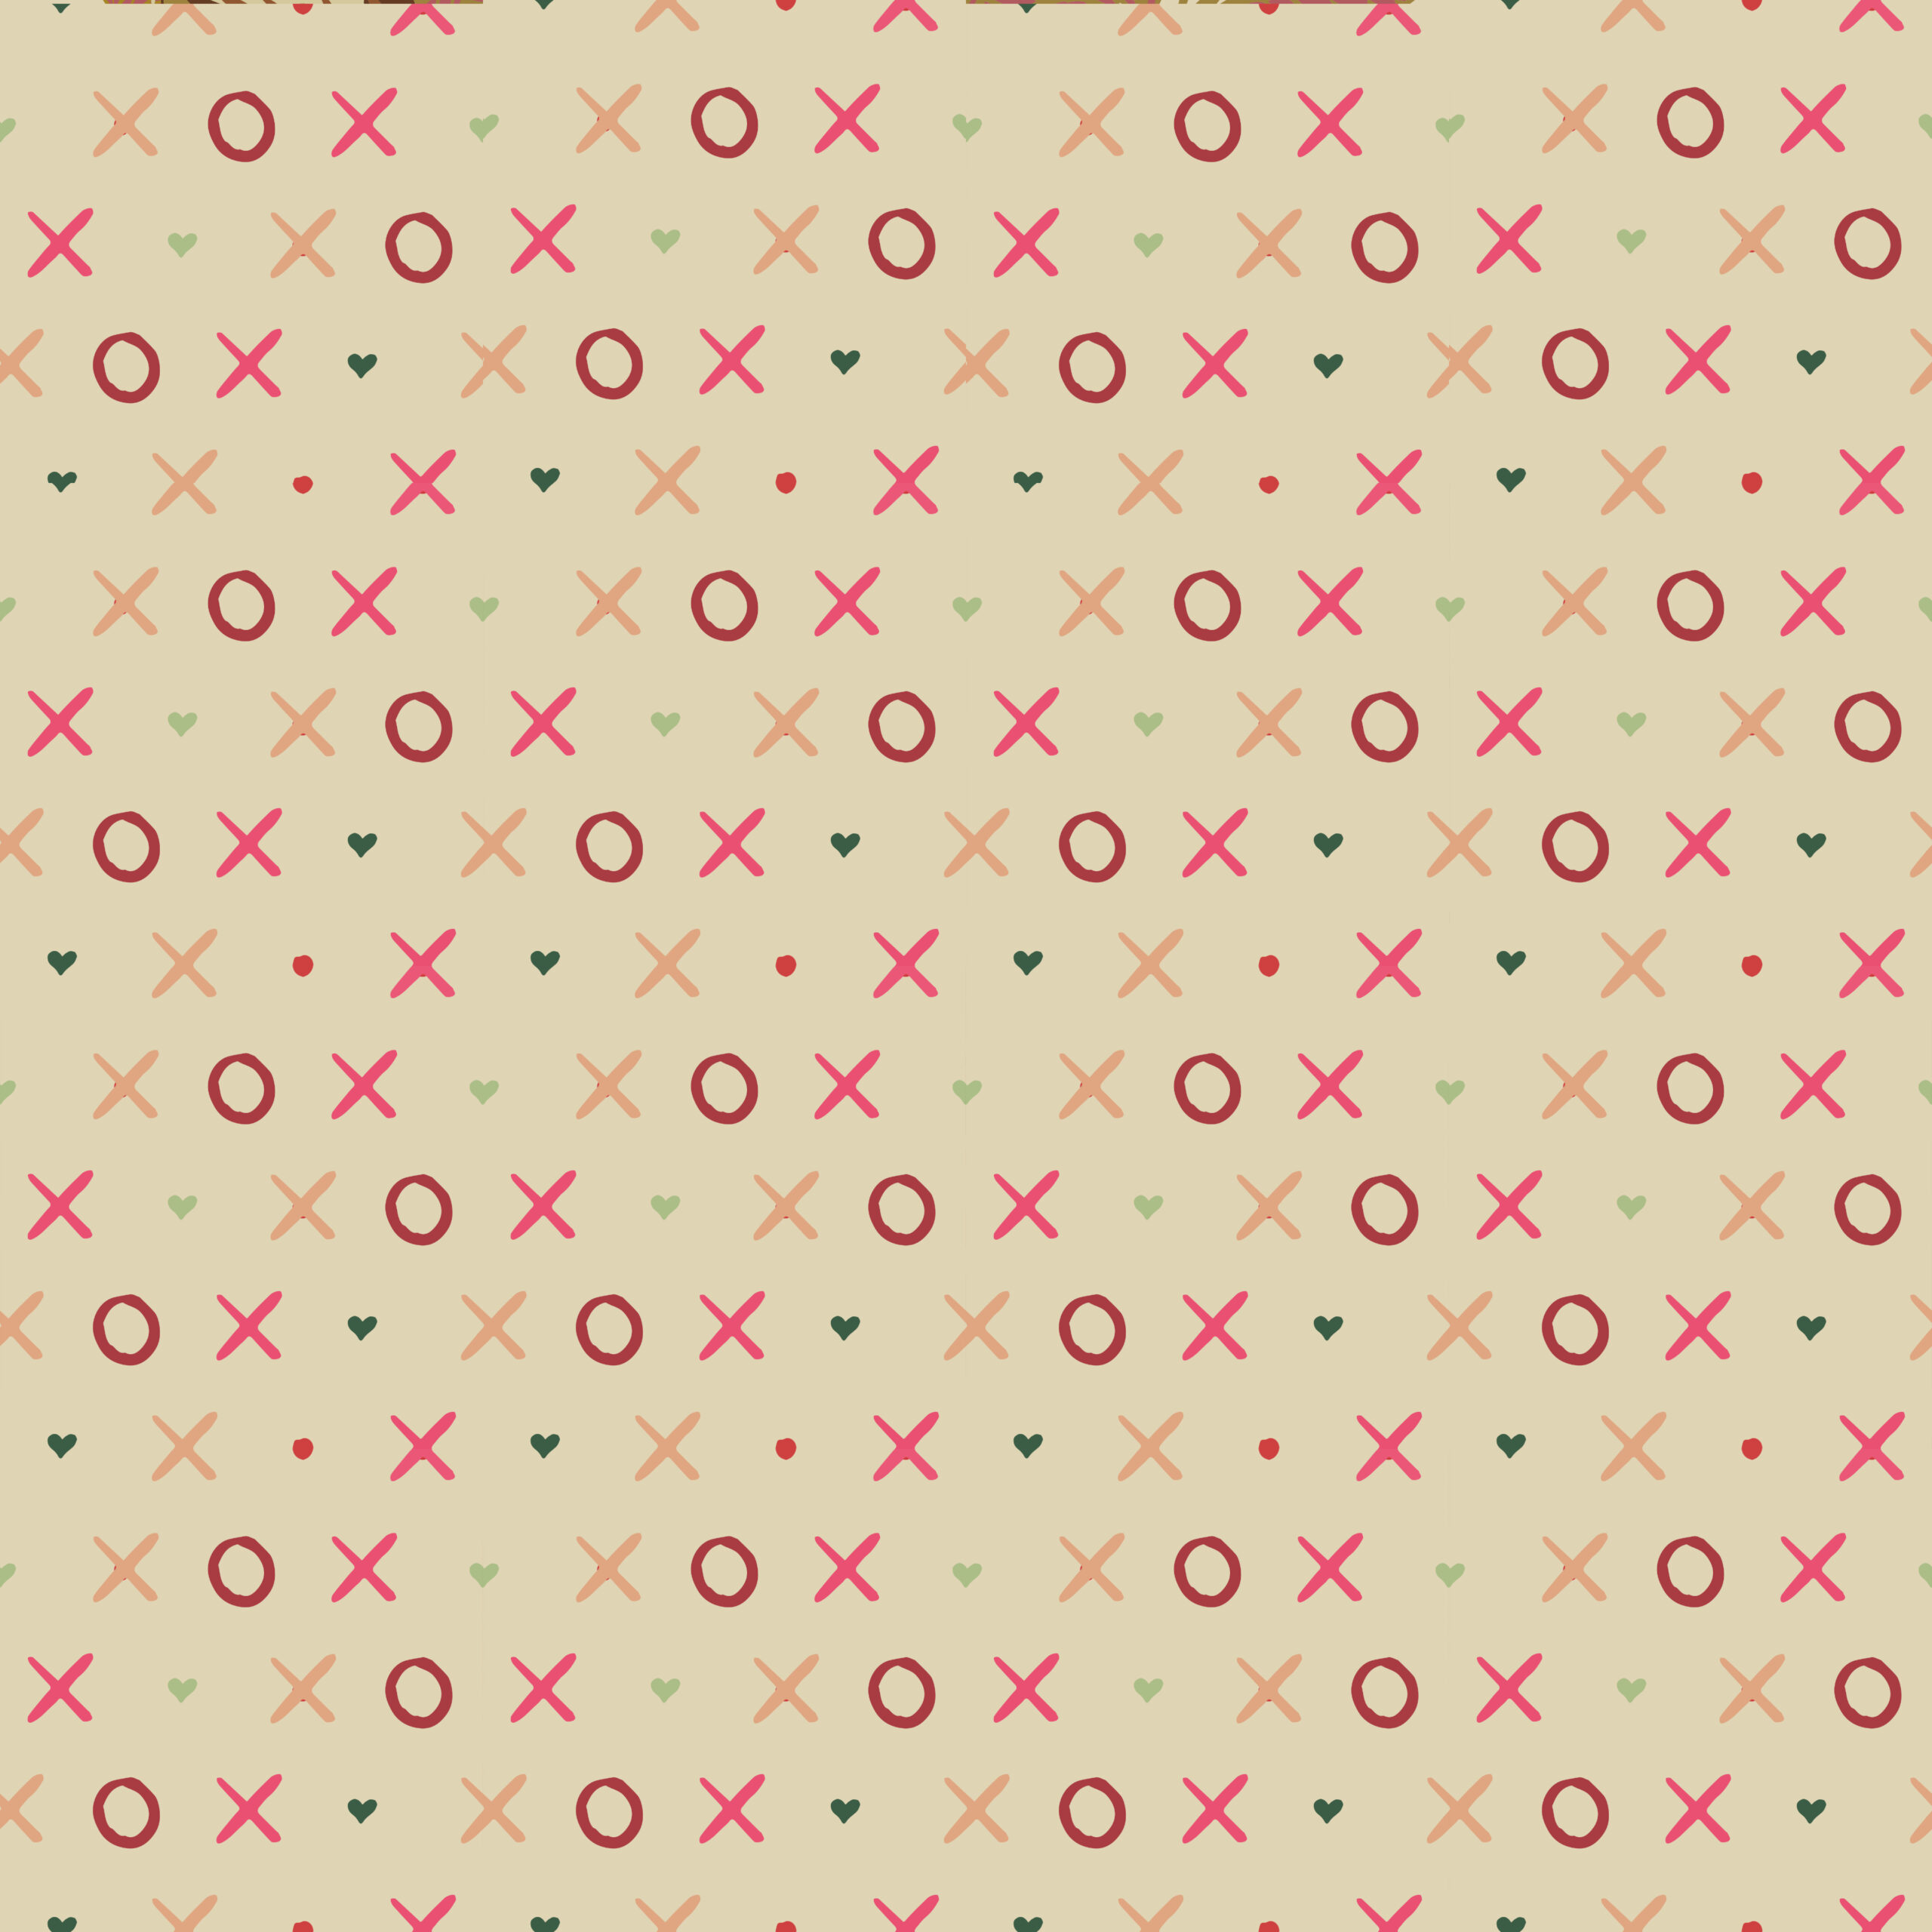 Valentines repeating pattern with alternating X's and O's or hugs and kisses.